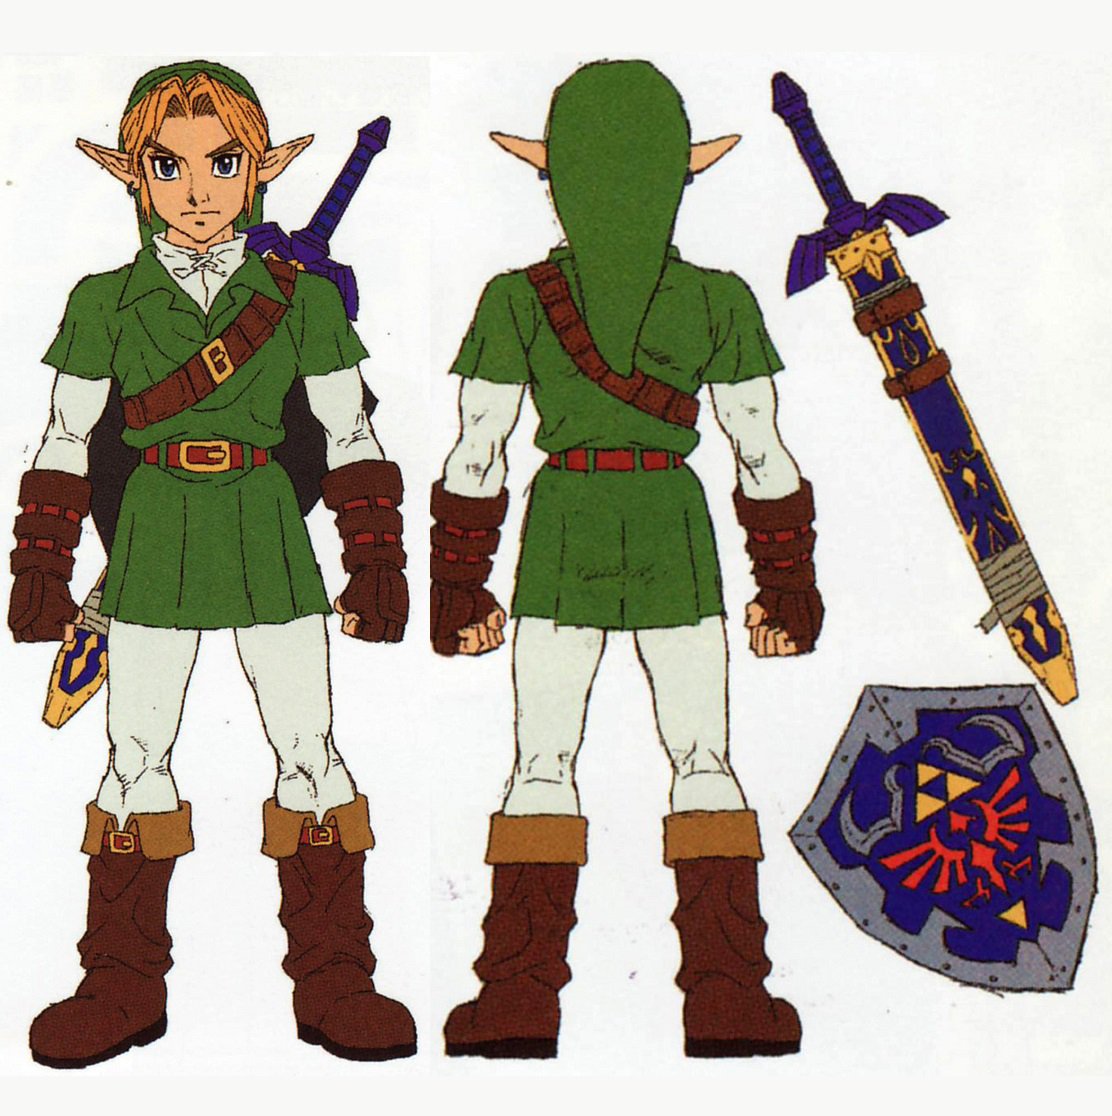 Ocarina Of Time Child Link - Alternate costume for link in project m. 